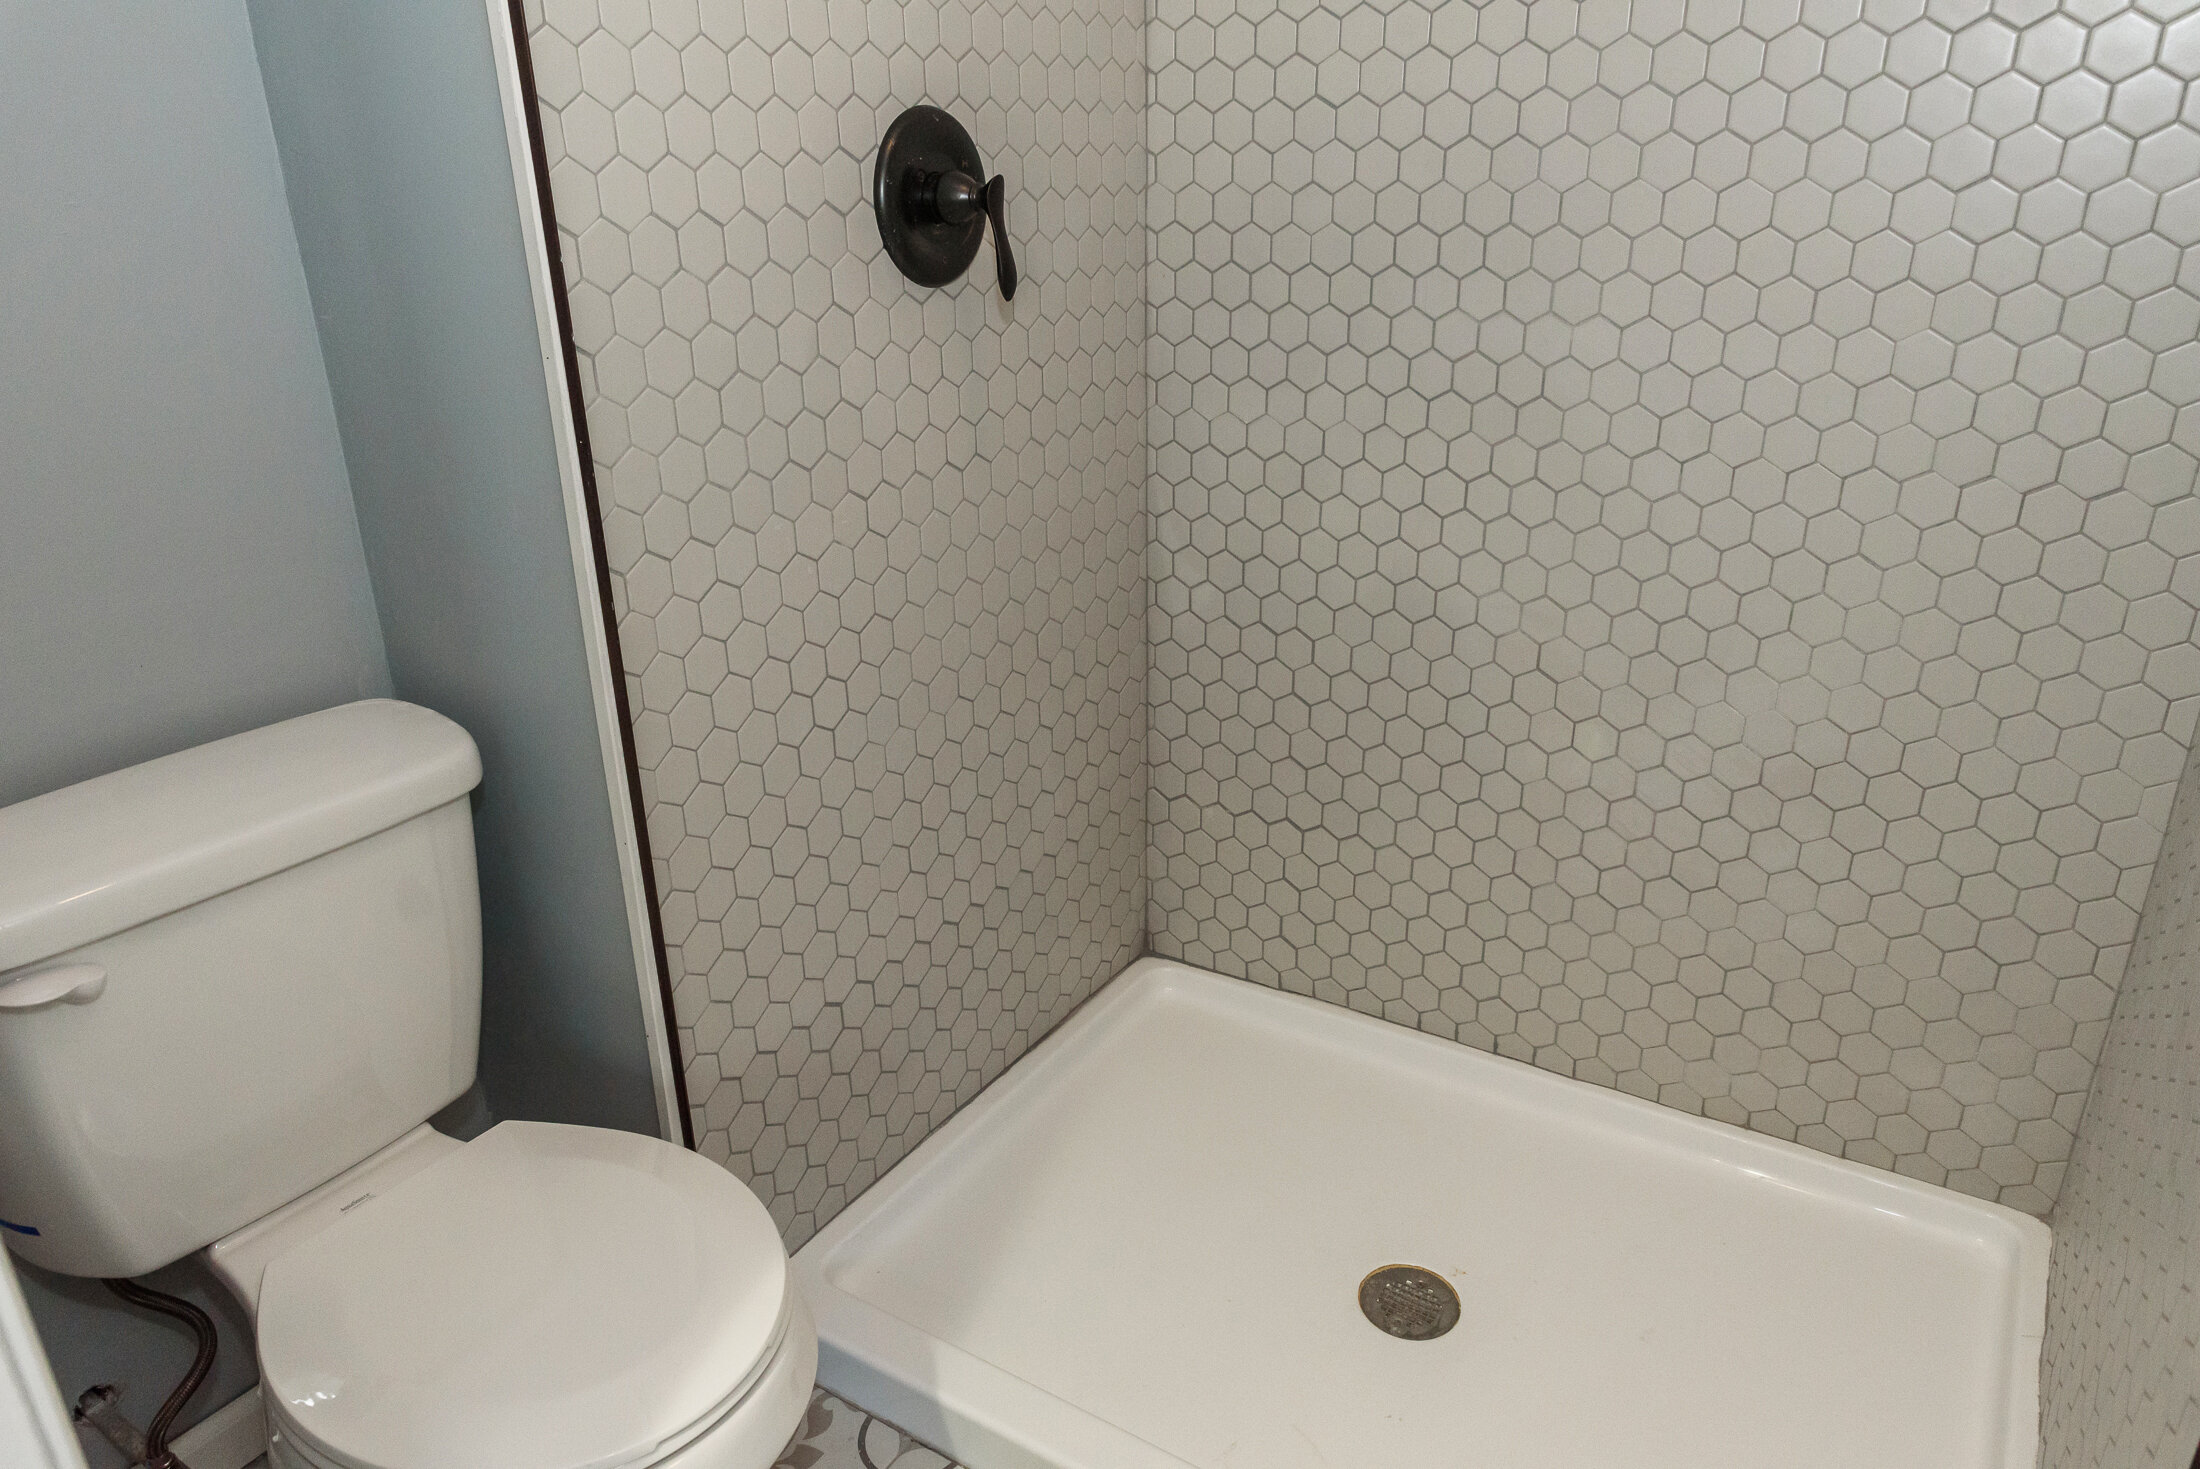 Hexagon Shower Tile with Dark Grout